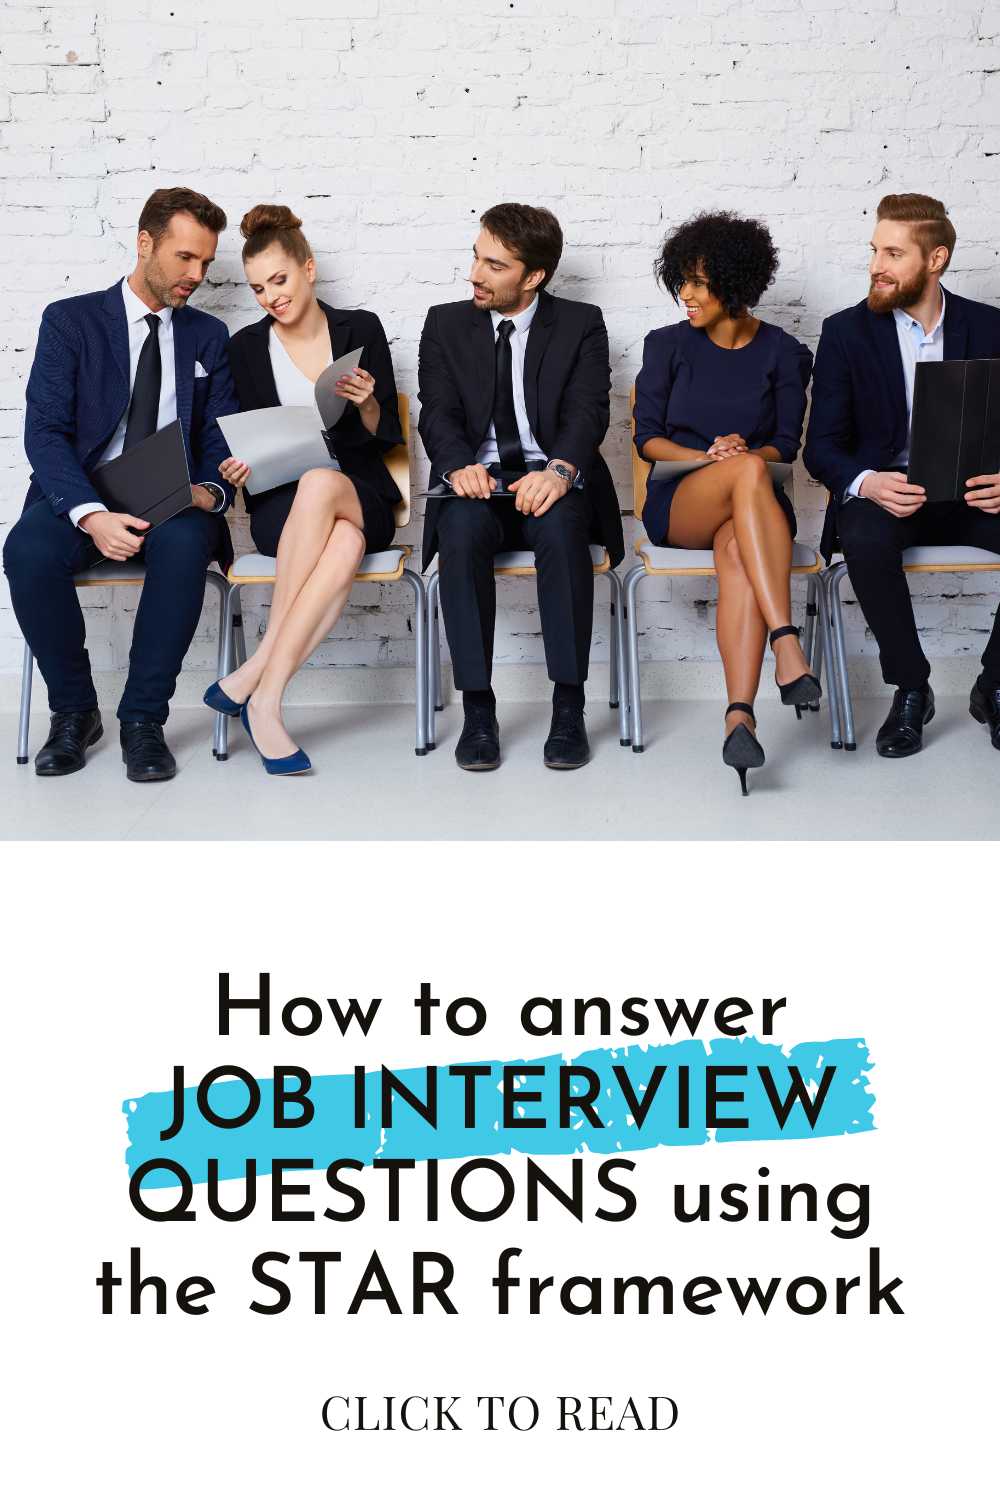 Tips and Advice on How to Answer Job Interview Questions Book Recommendations to Help You Develop Communication Skills | Find a job | Resume Templates | Job Interview Advice